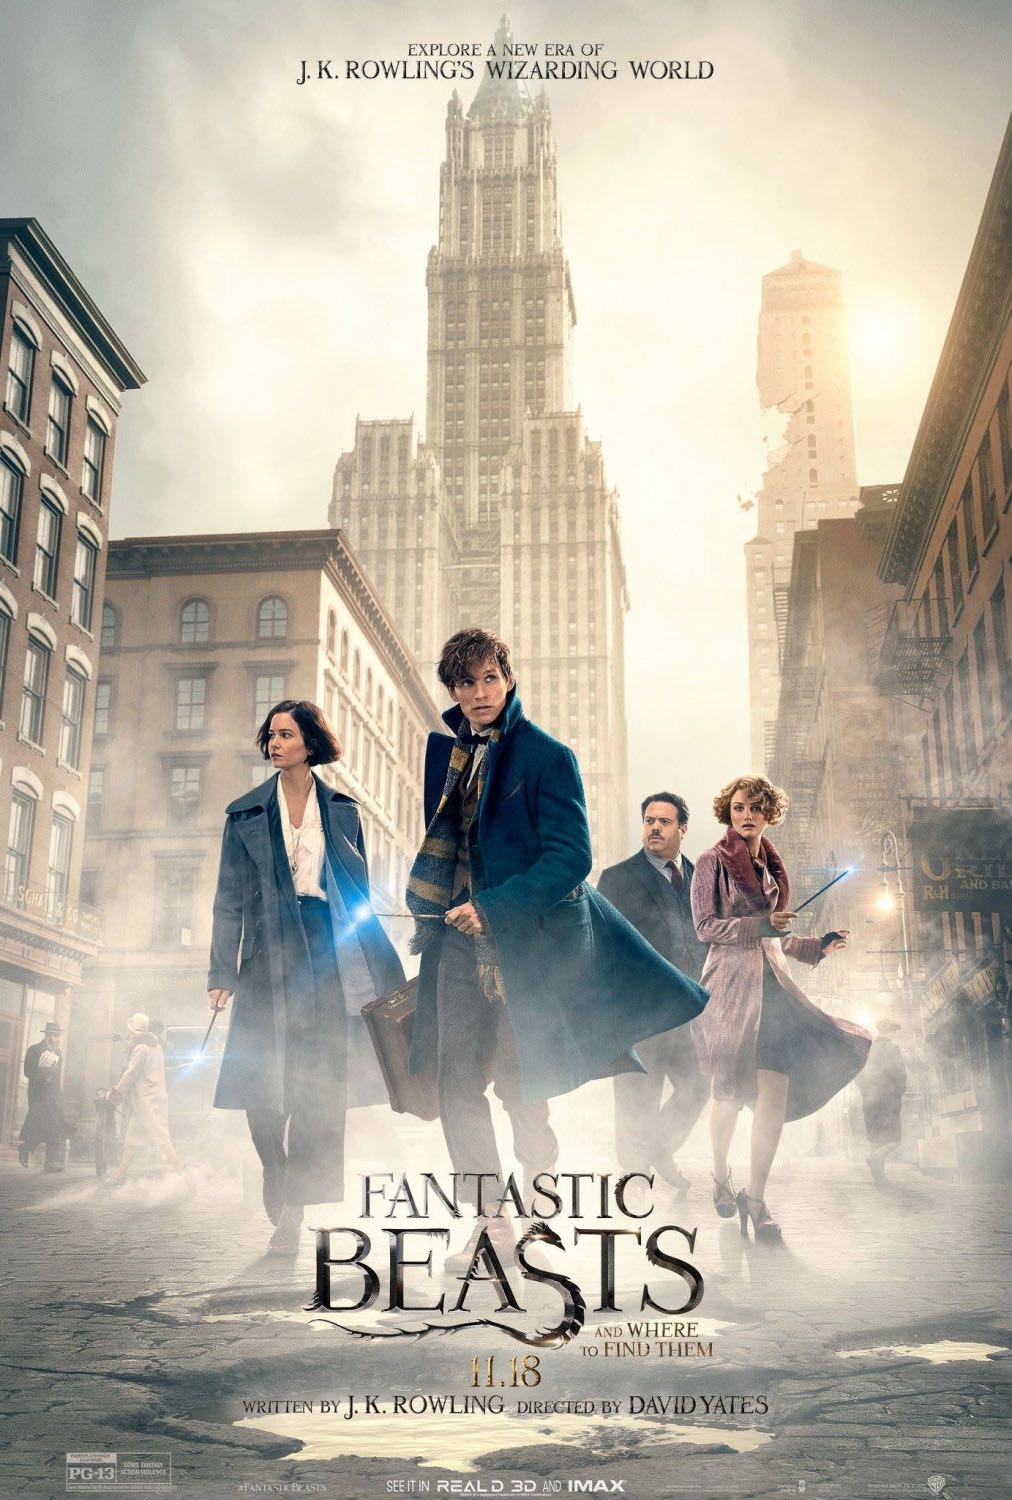 Fantastic Beasts And Where To Find Them  art collectible - Main Image 1